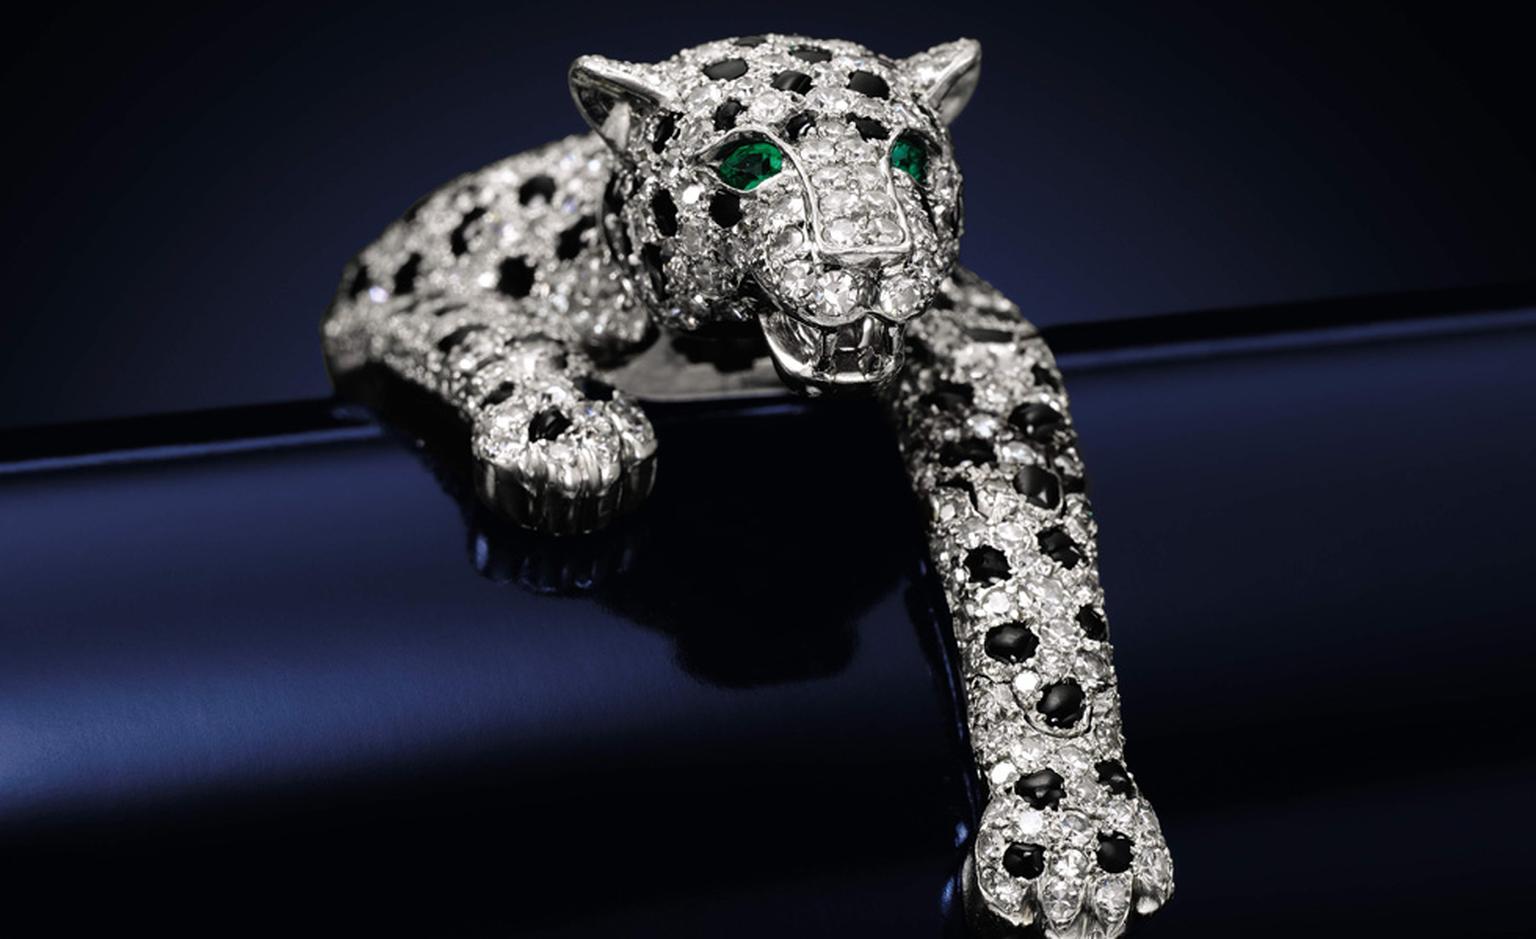 Star of the Show, the 1952 Cartier Panther bracelet Sotheby's Lot 19 Cartier Panther bracelet that  sold for £4,521,250